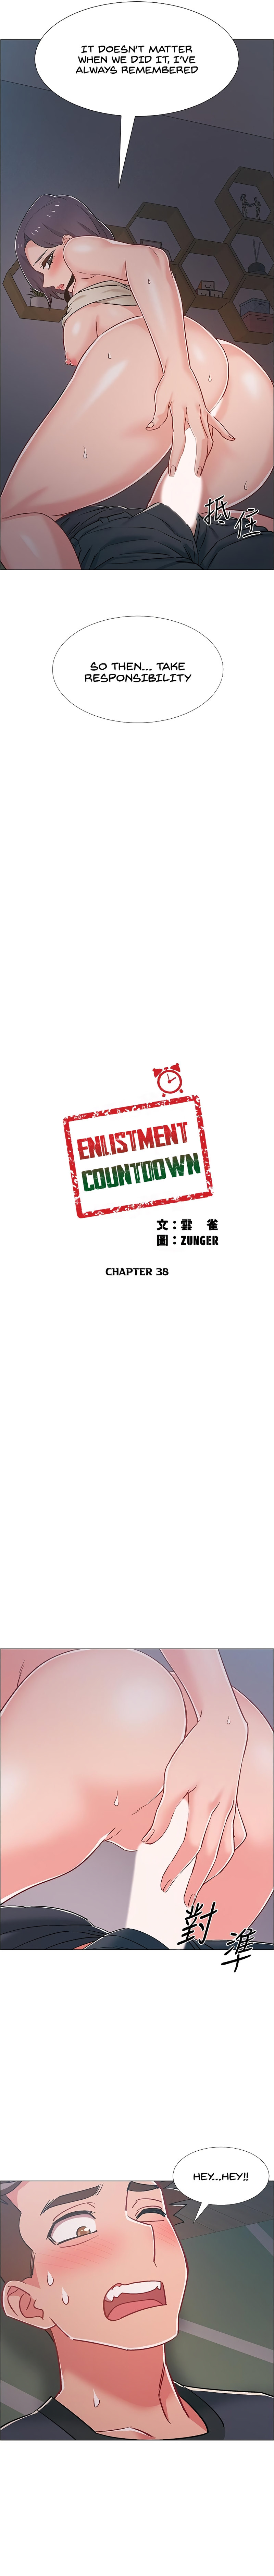 Enlistment Countdown - Chapter 37 Page 3